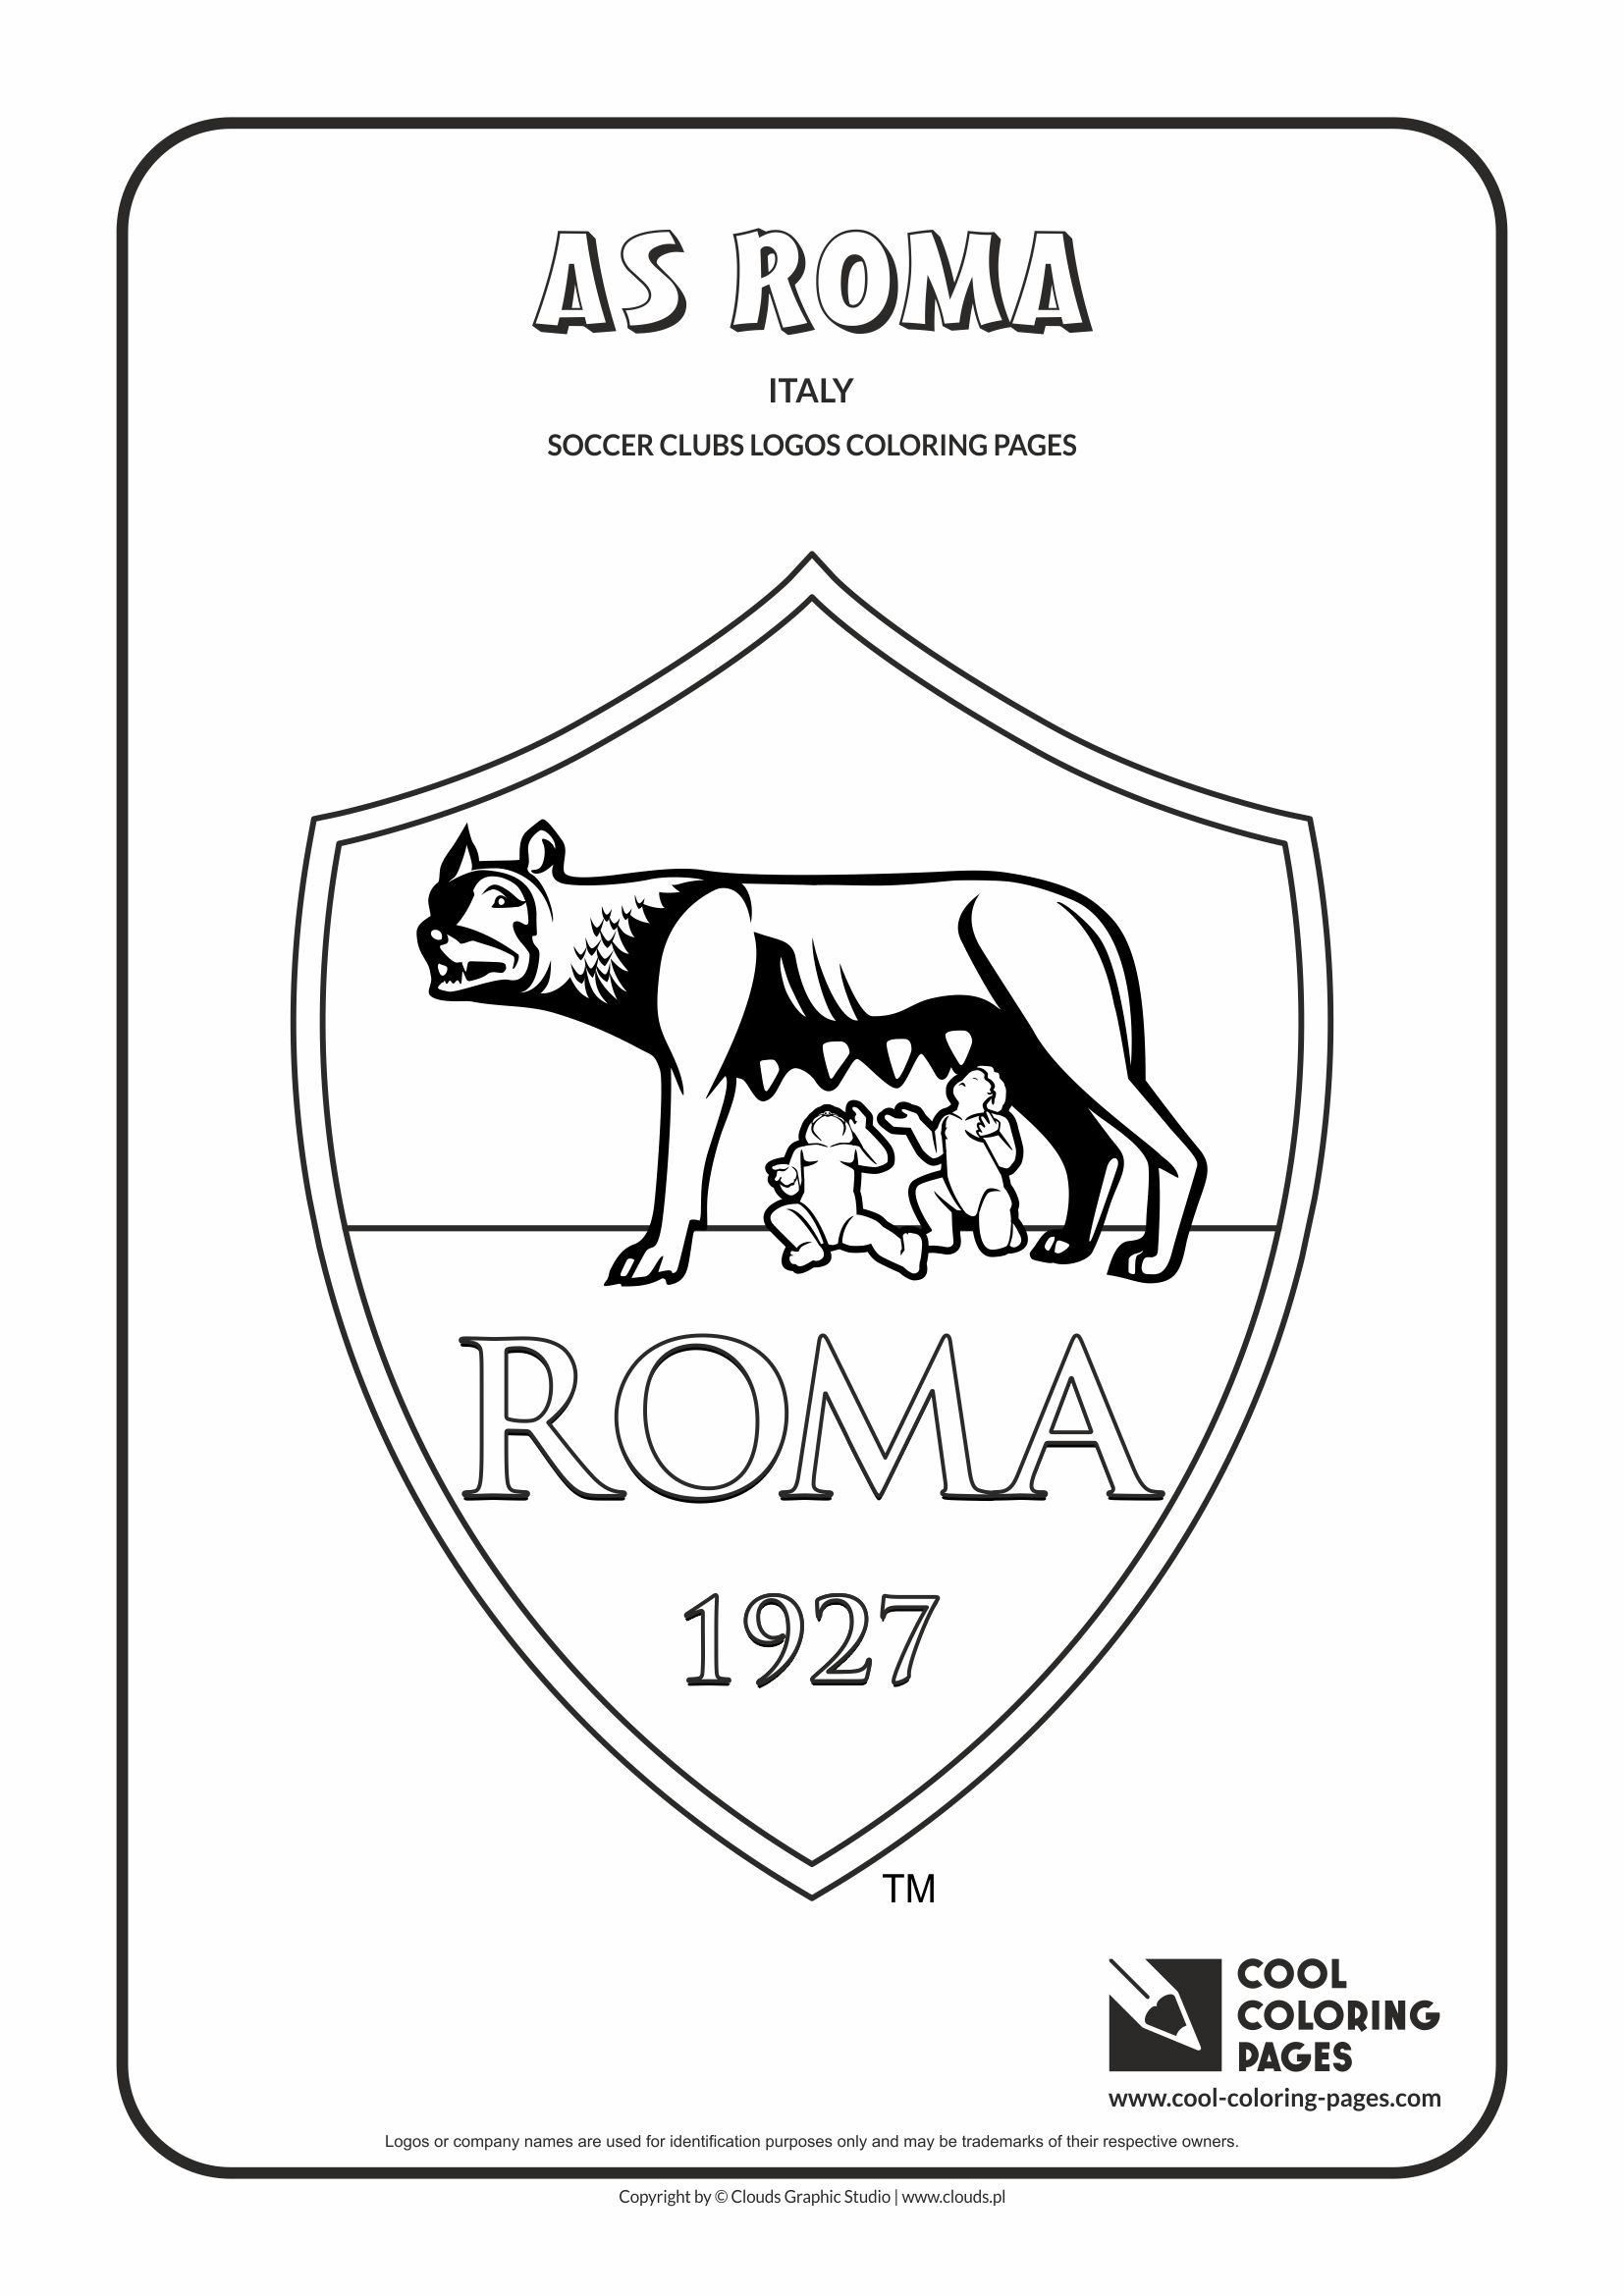 Cool Coloring Pages Soccer clubs logos - Cool Coloring Pages ...